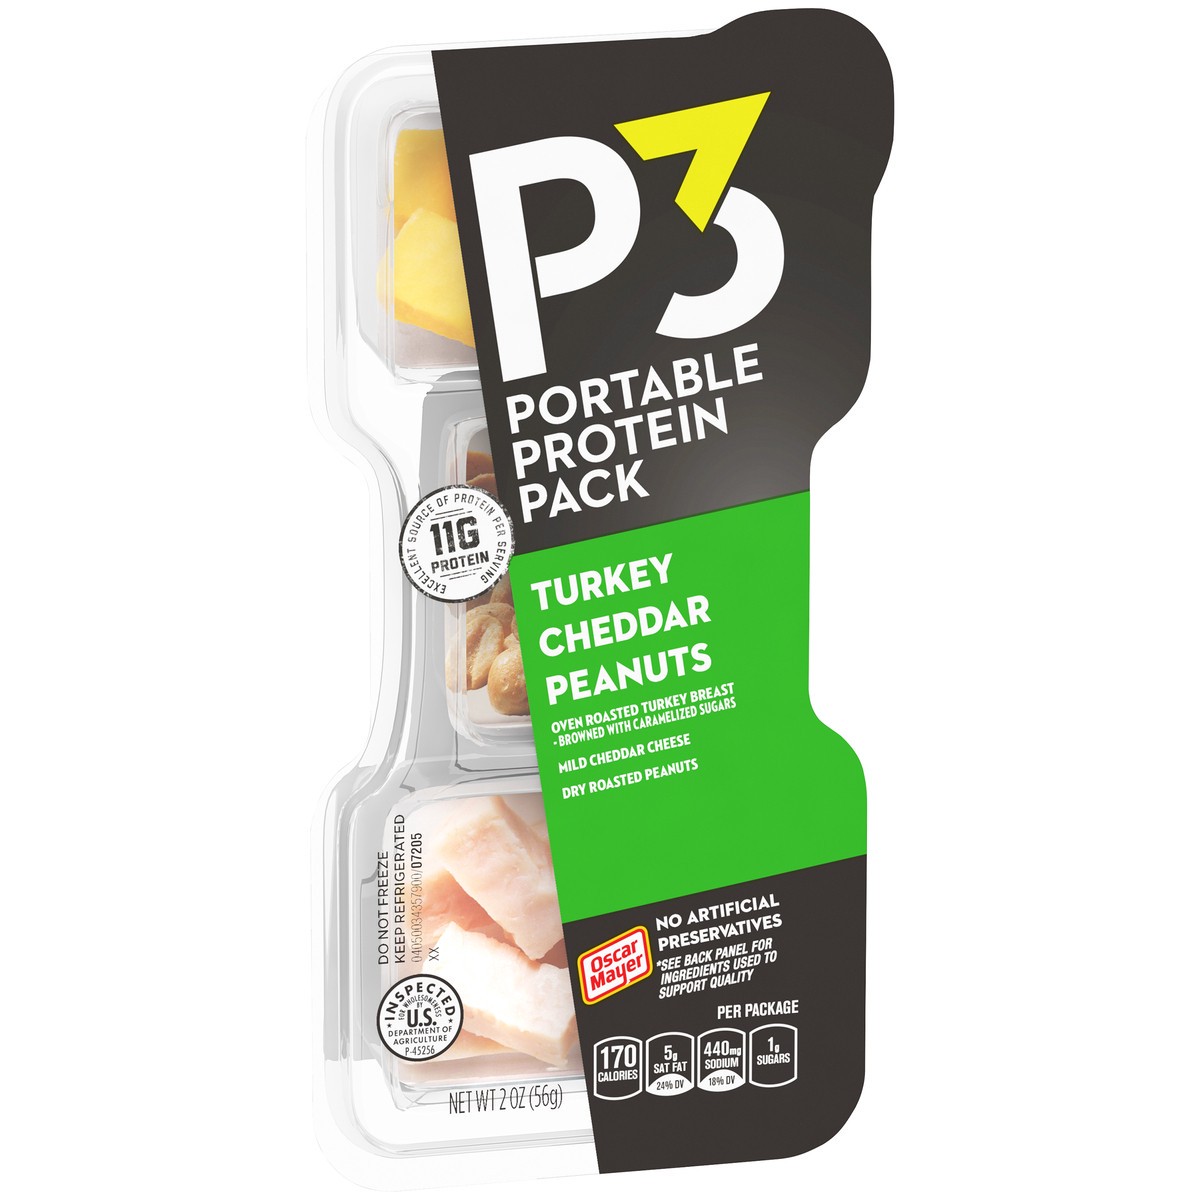 slide 2 of 9, P3 Portable Protein Snack Pack with Turkey, Peanuts & Cheddar Cheese, 2 oz Tray, 2 oz